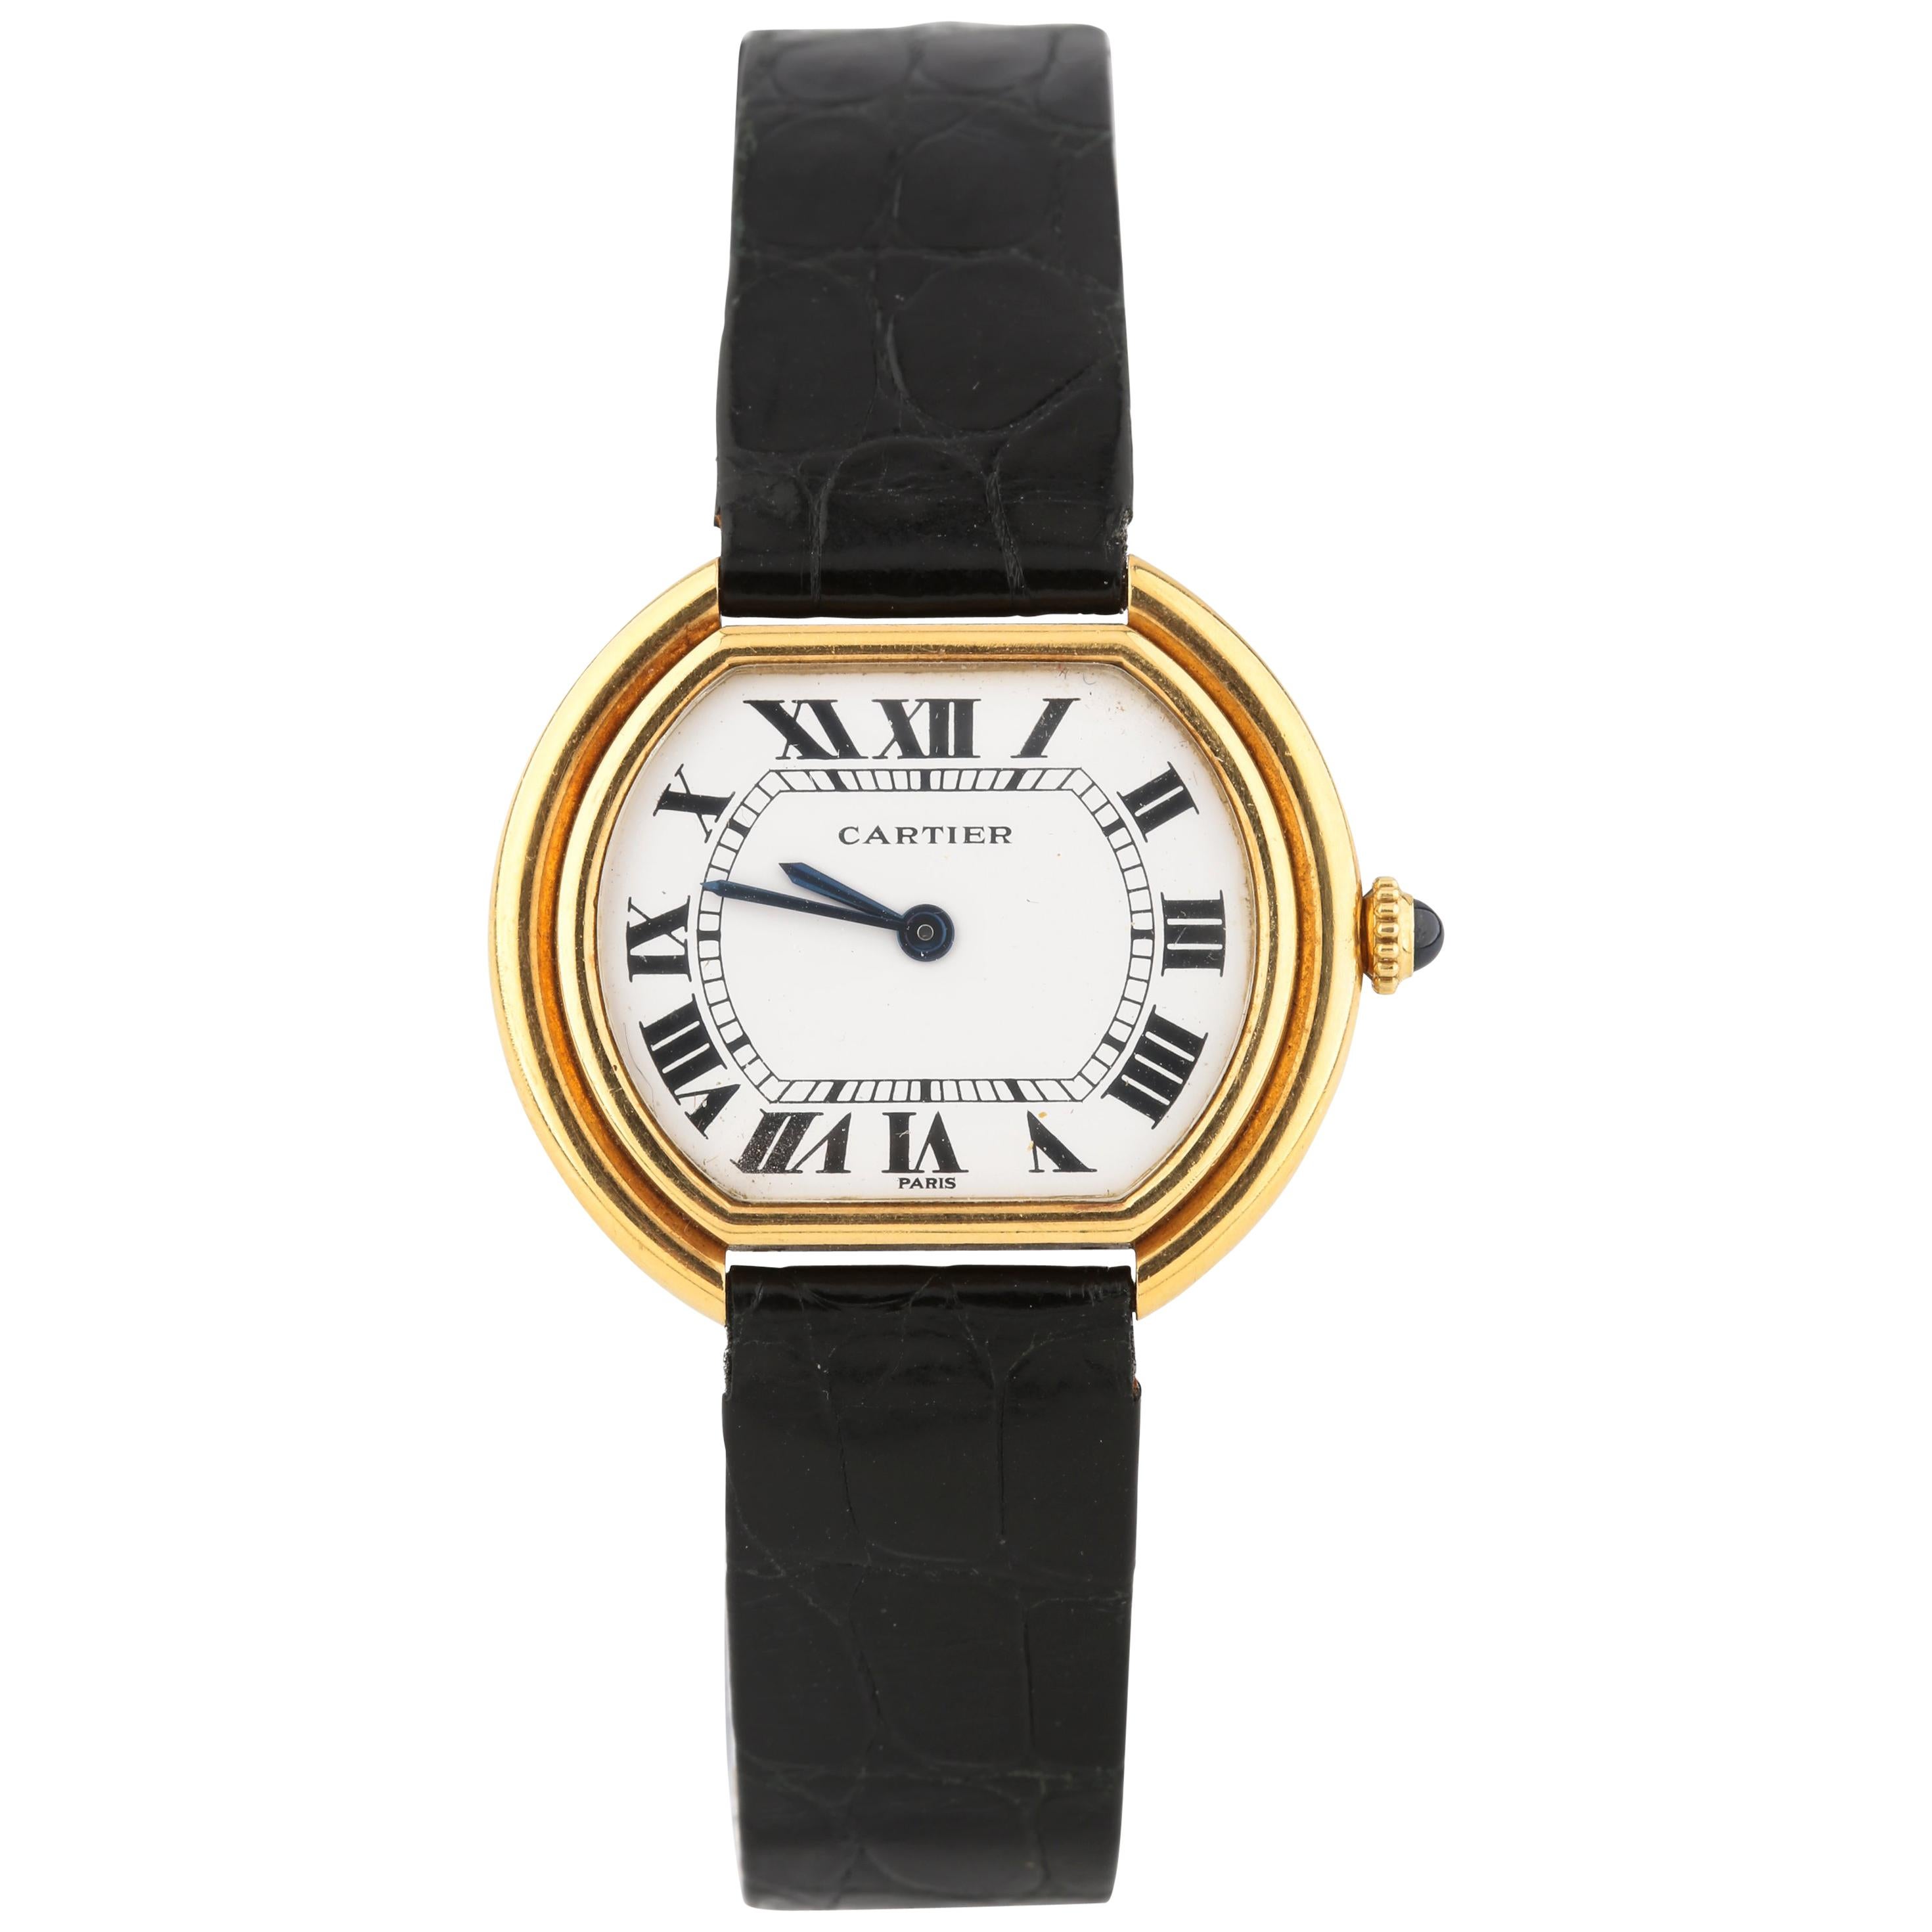 Cartier Ellipse 18 Karat Yellow Gold Women's Wristwatch with Leather Band